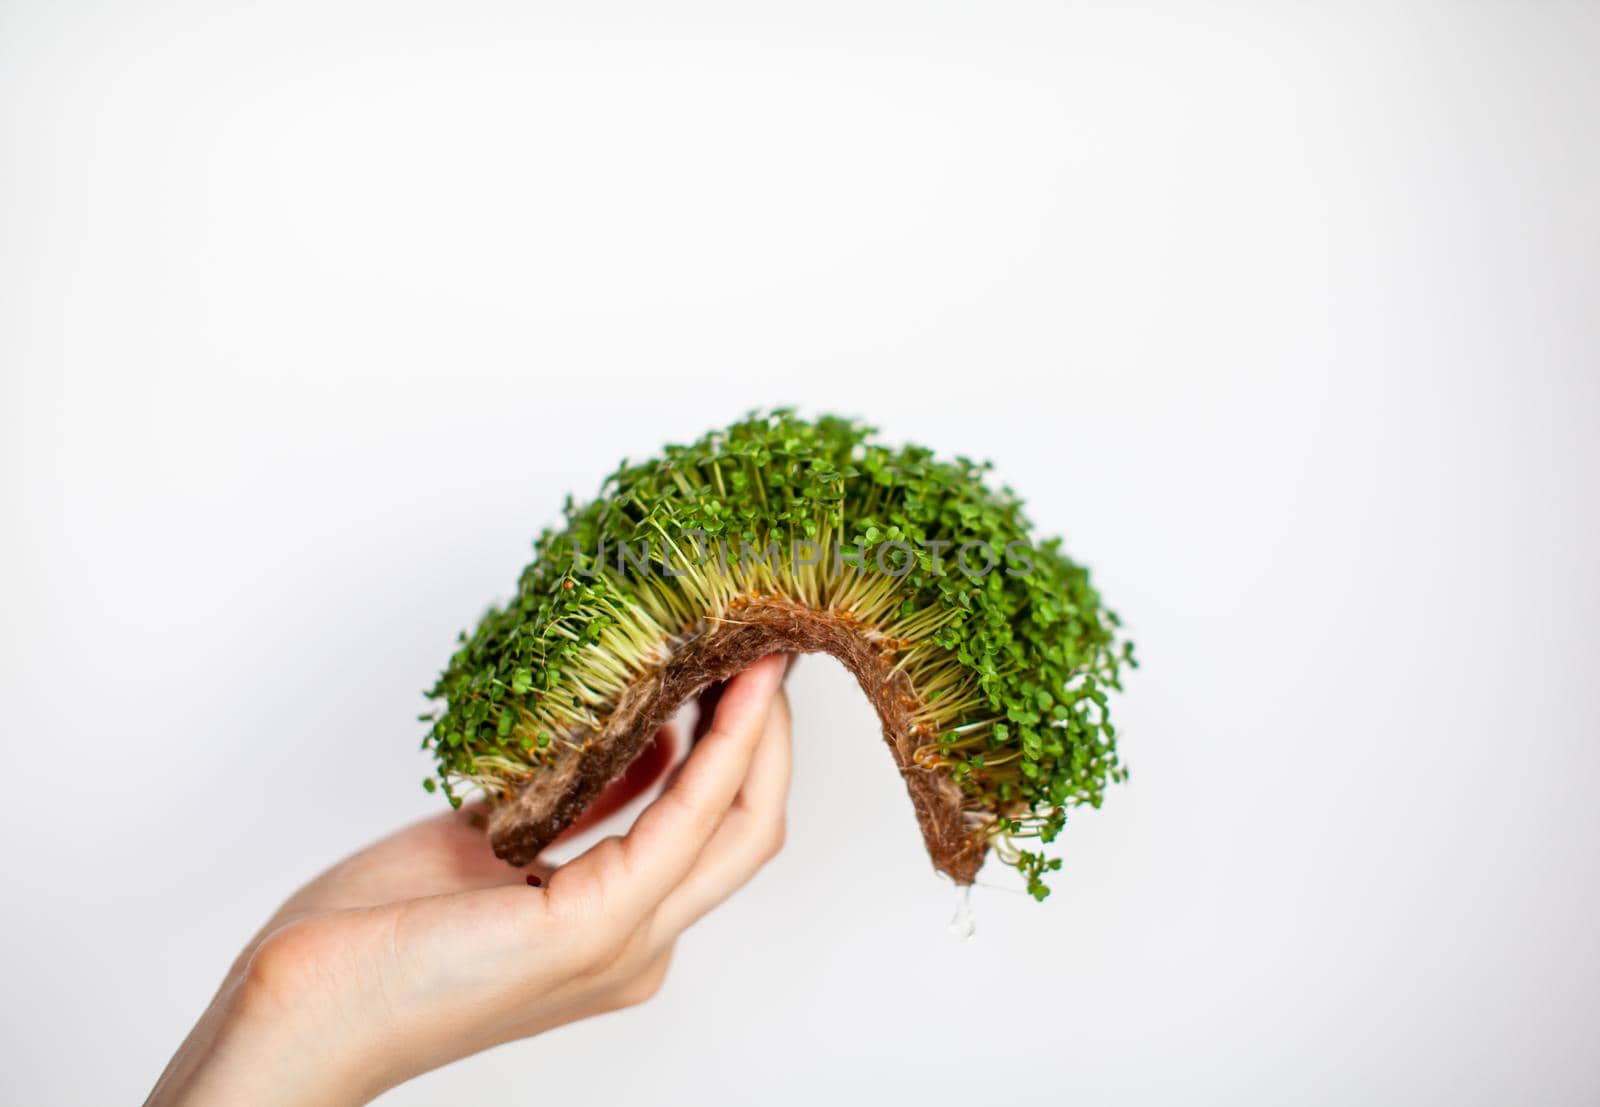 Micro-greens of mustard, arugula and other plants in a woman's hand. Growing mustard sprouts in close-up at home. The concept of vegan and healthy food. Sprouted seeds, micro-greens